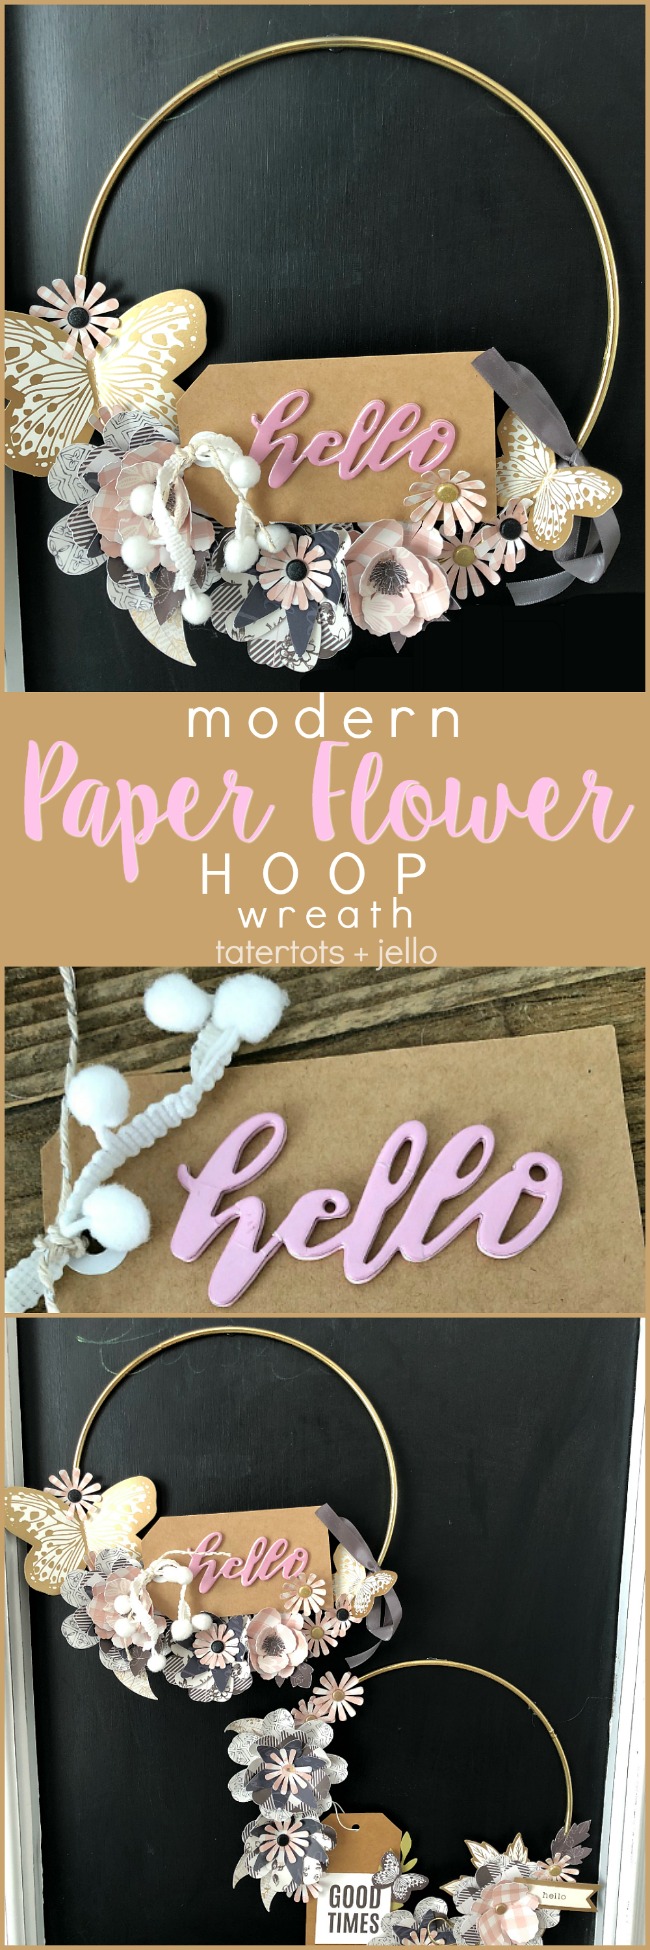 Modern Paper Flower Wreath - a beautiful gift idea or a striking wall hanging for your home!